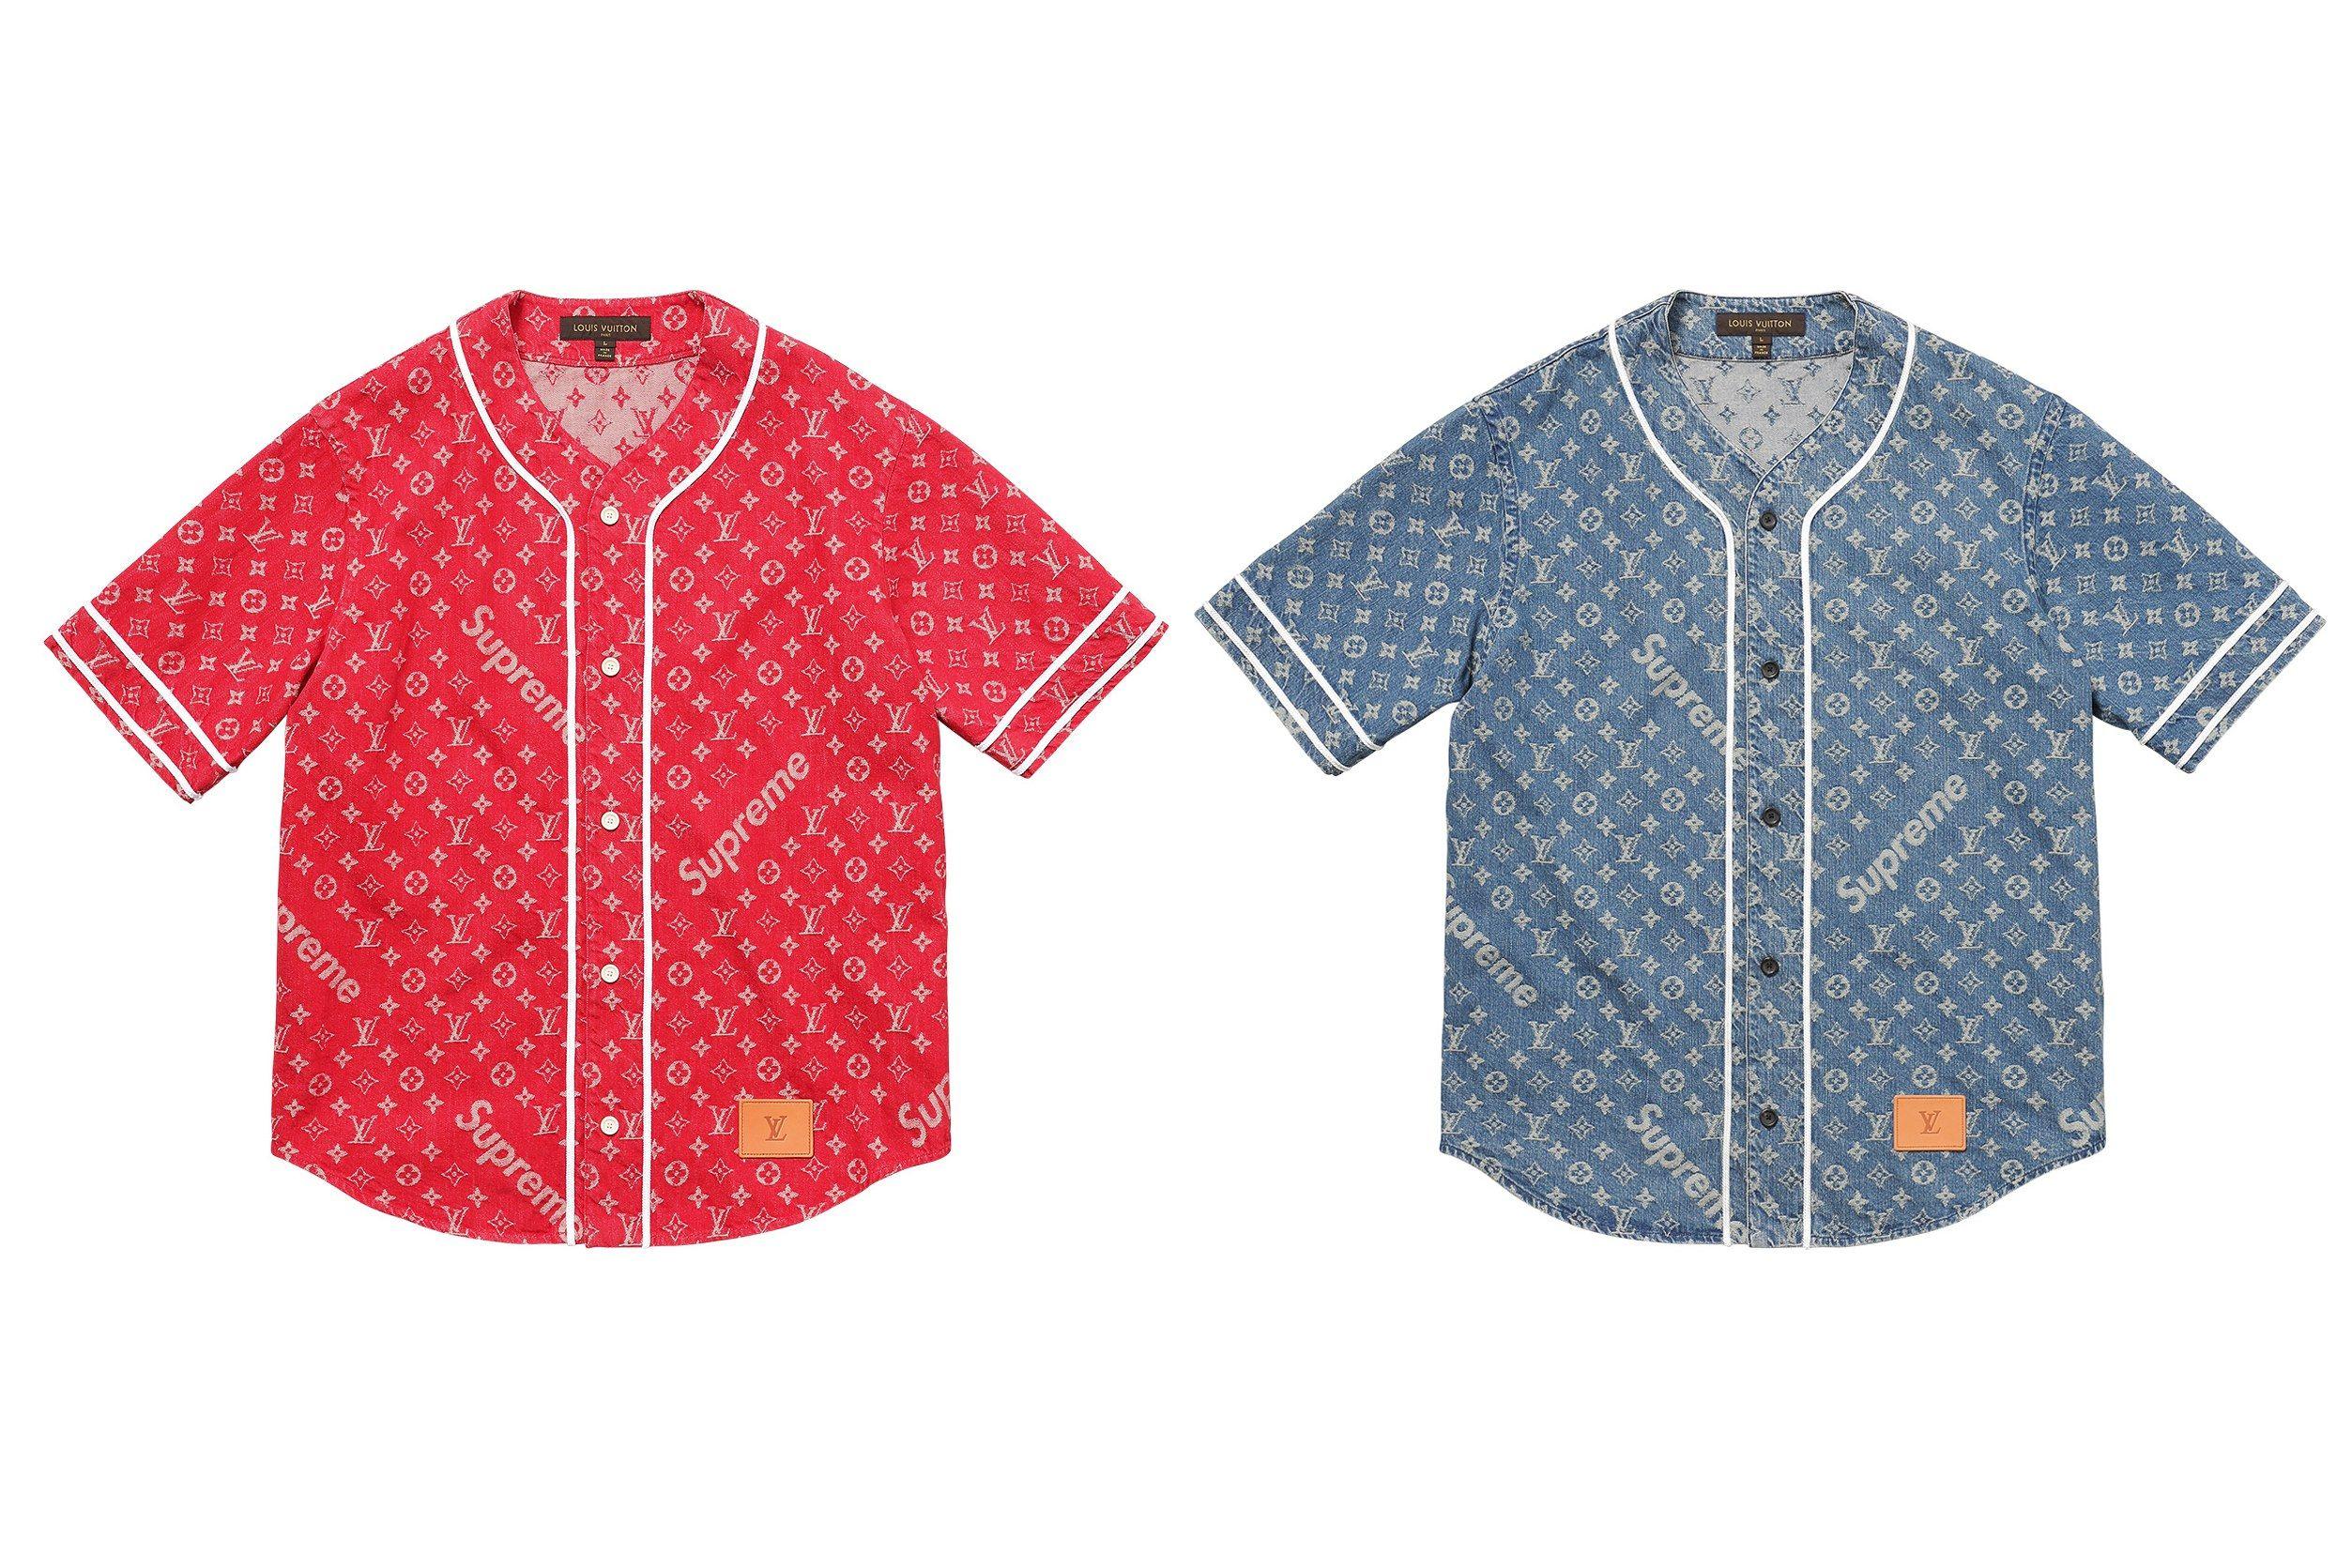 Supreme x Louis Vuitton: See Every Piece from the Game-changing